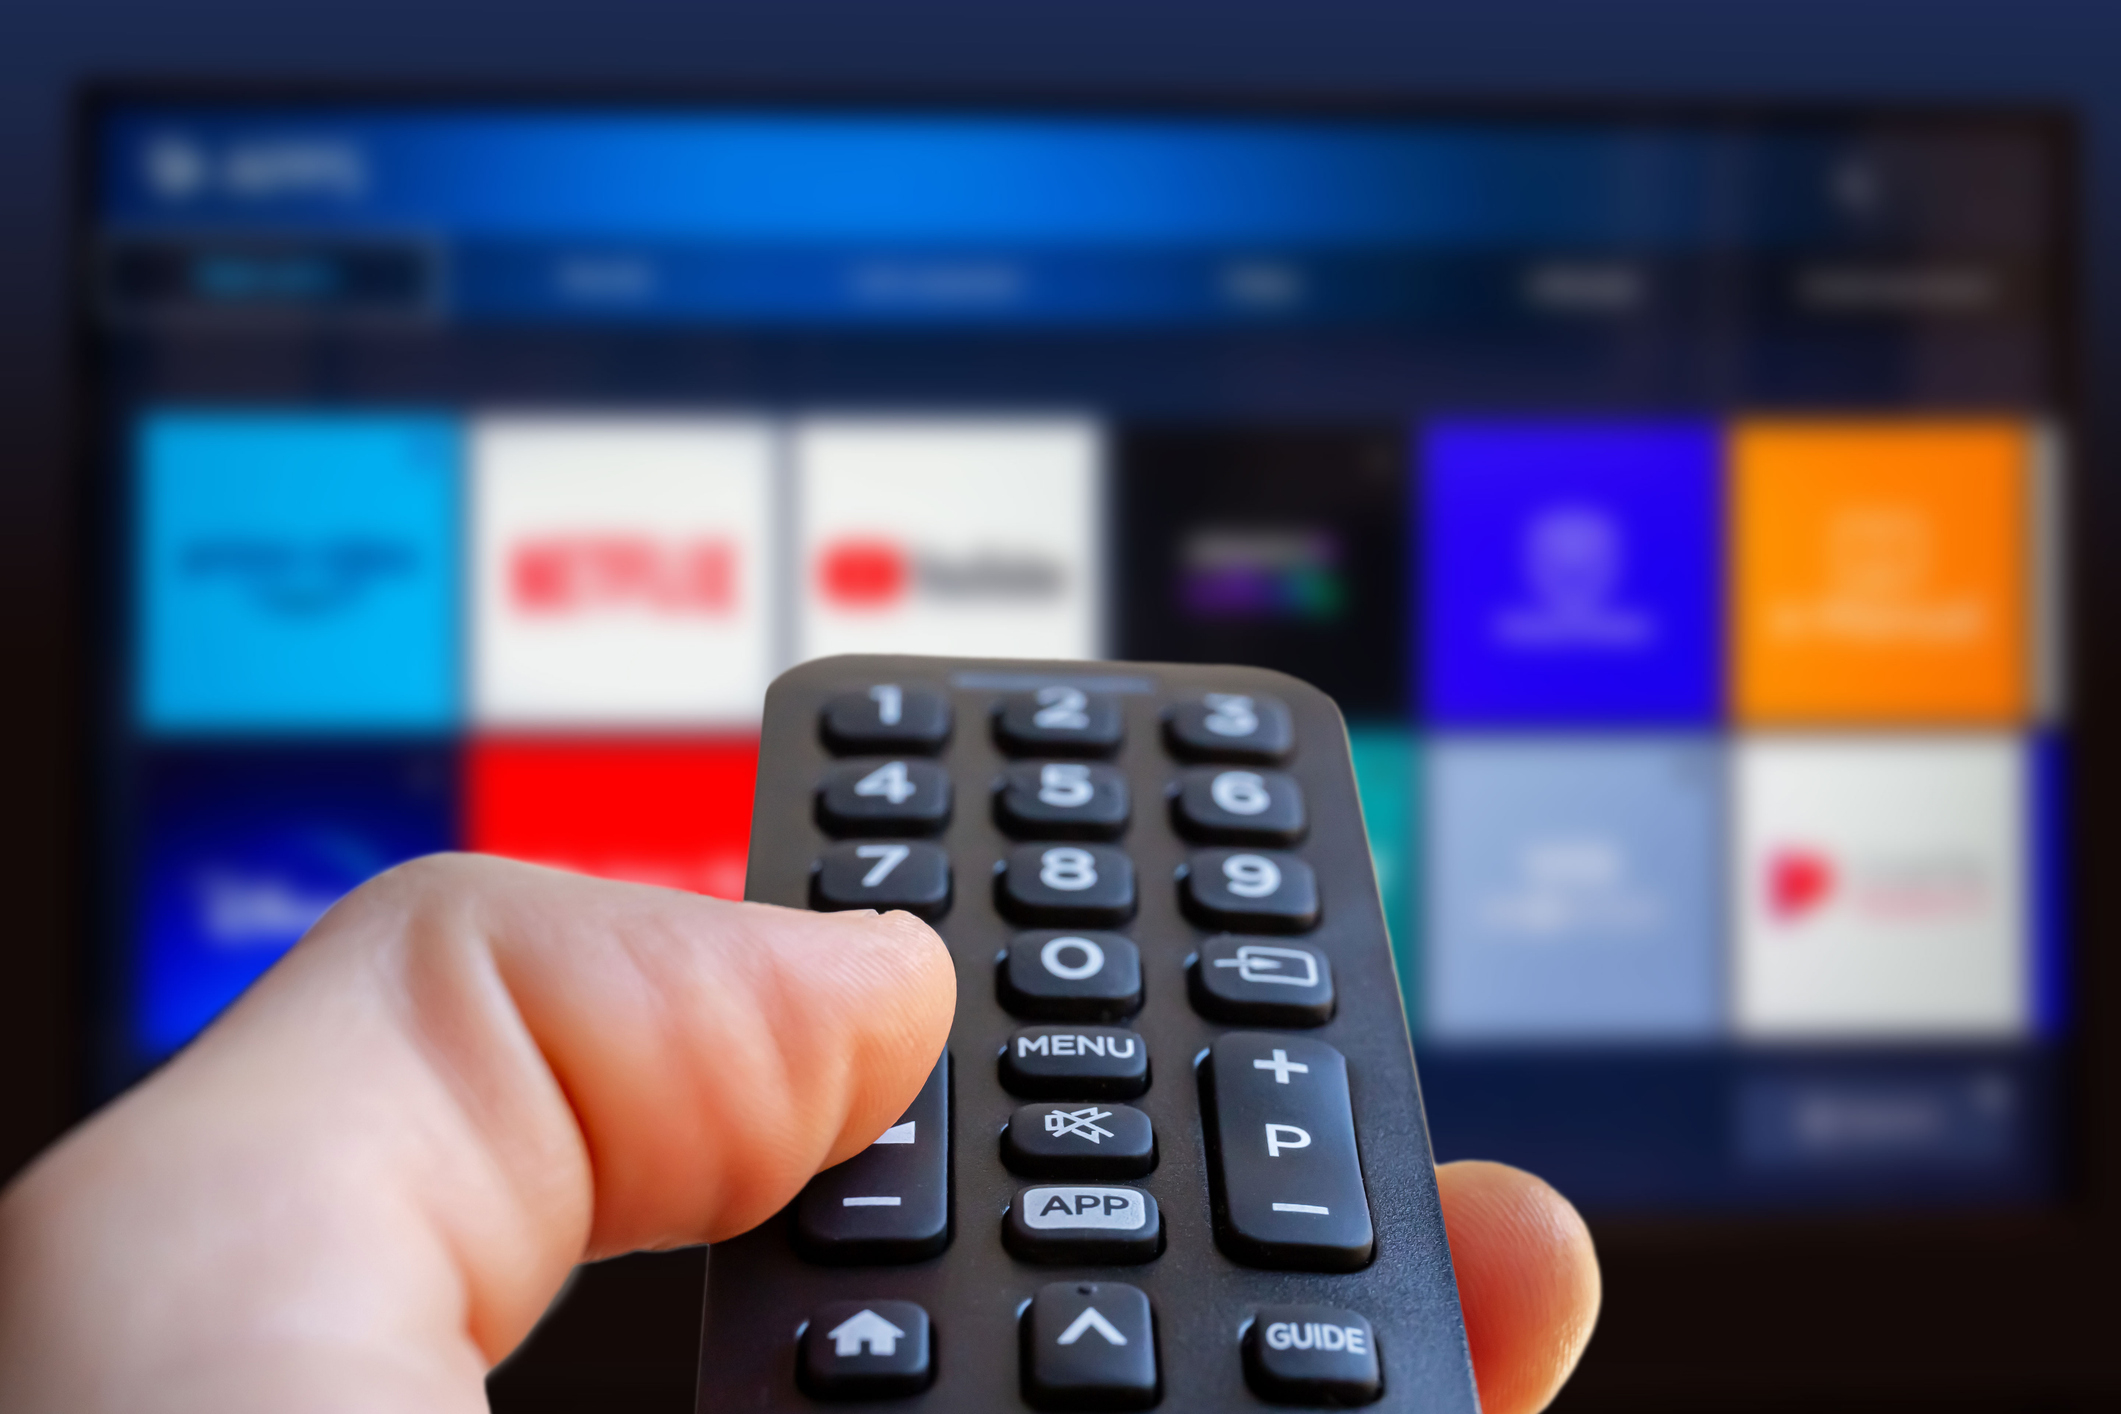 Hand holding a remote control, pointing at a blurred smart TV screen with app icons